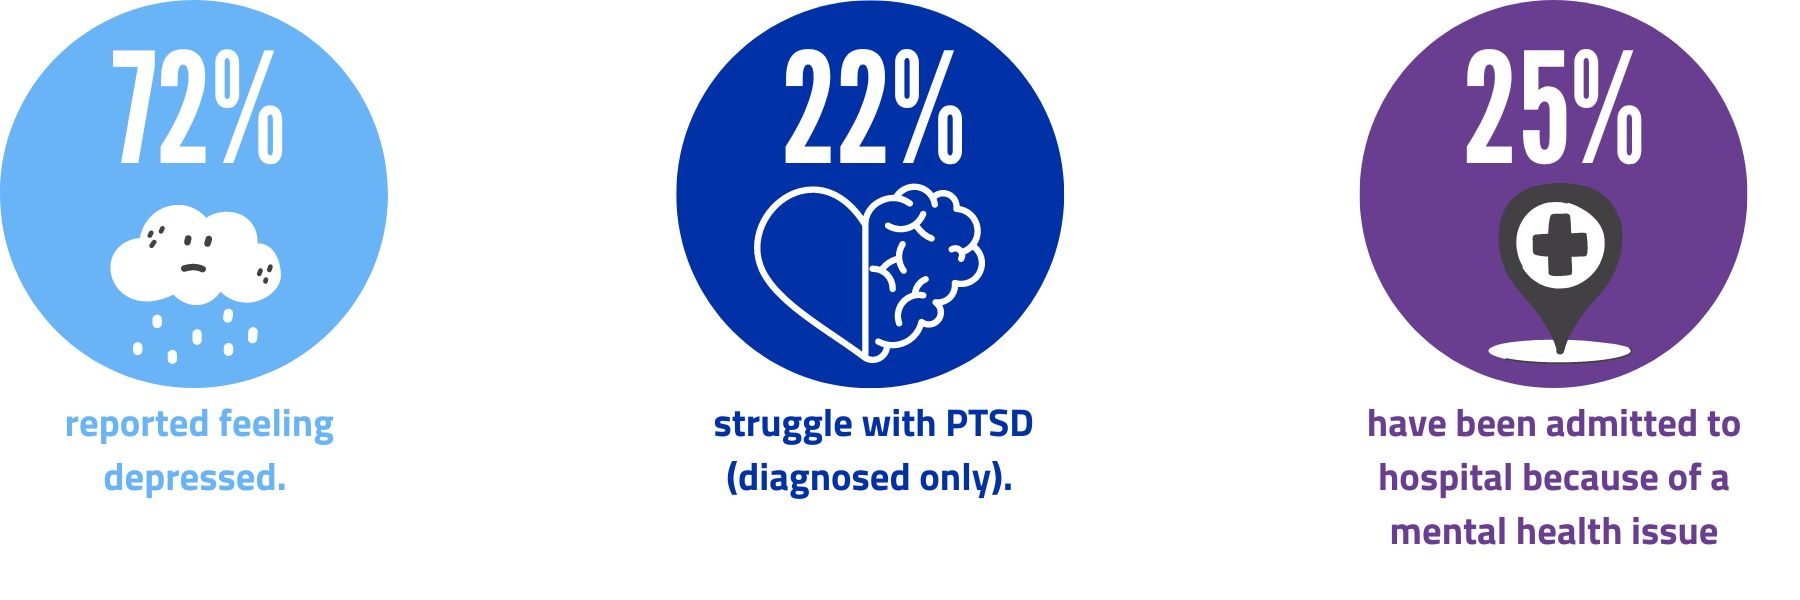 mental health statistics showing 72% reported feeling depressed, 22% struggle with PTSD (diagnosed only) and 25% have been admitted to hospital because of a mental health issue